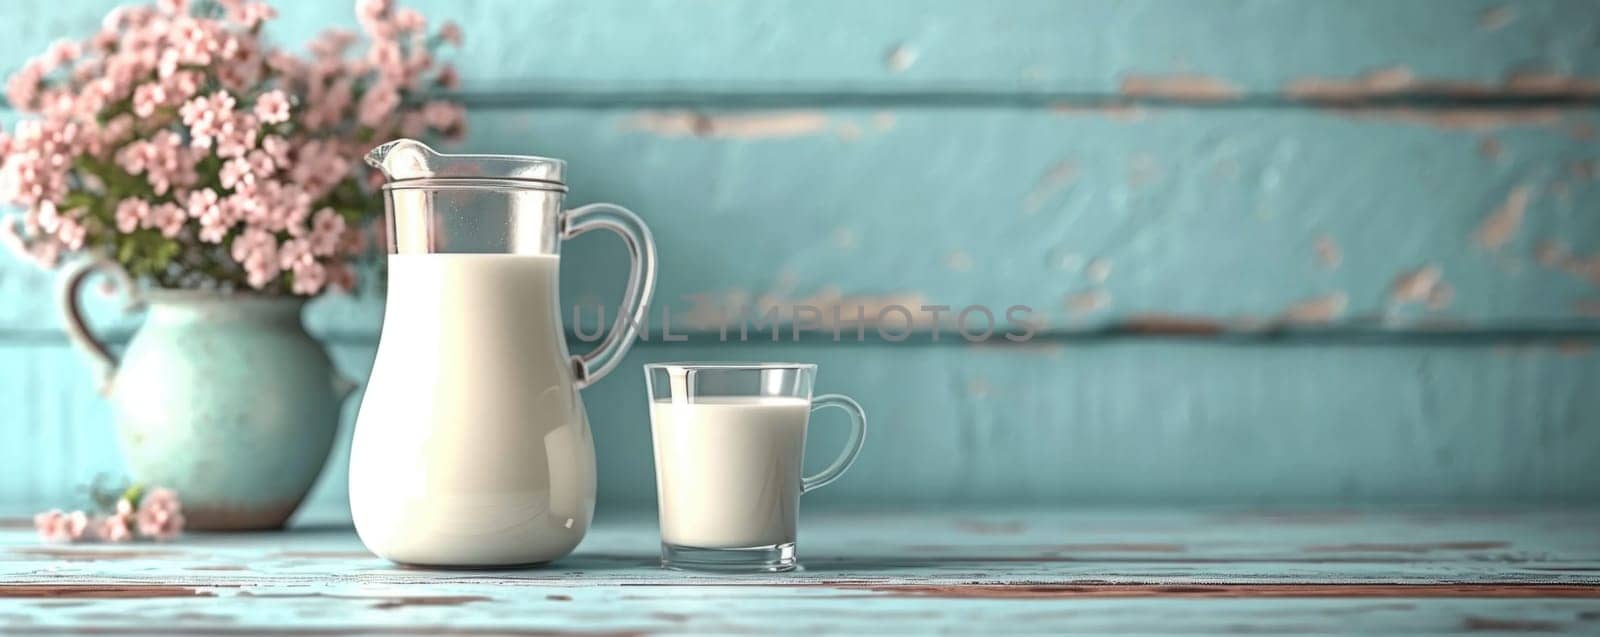 Full carafe and mug of milk on blue cloth by Yurich32